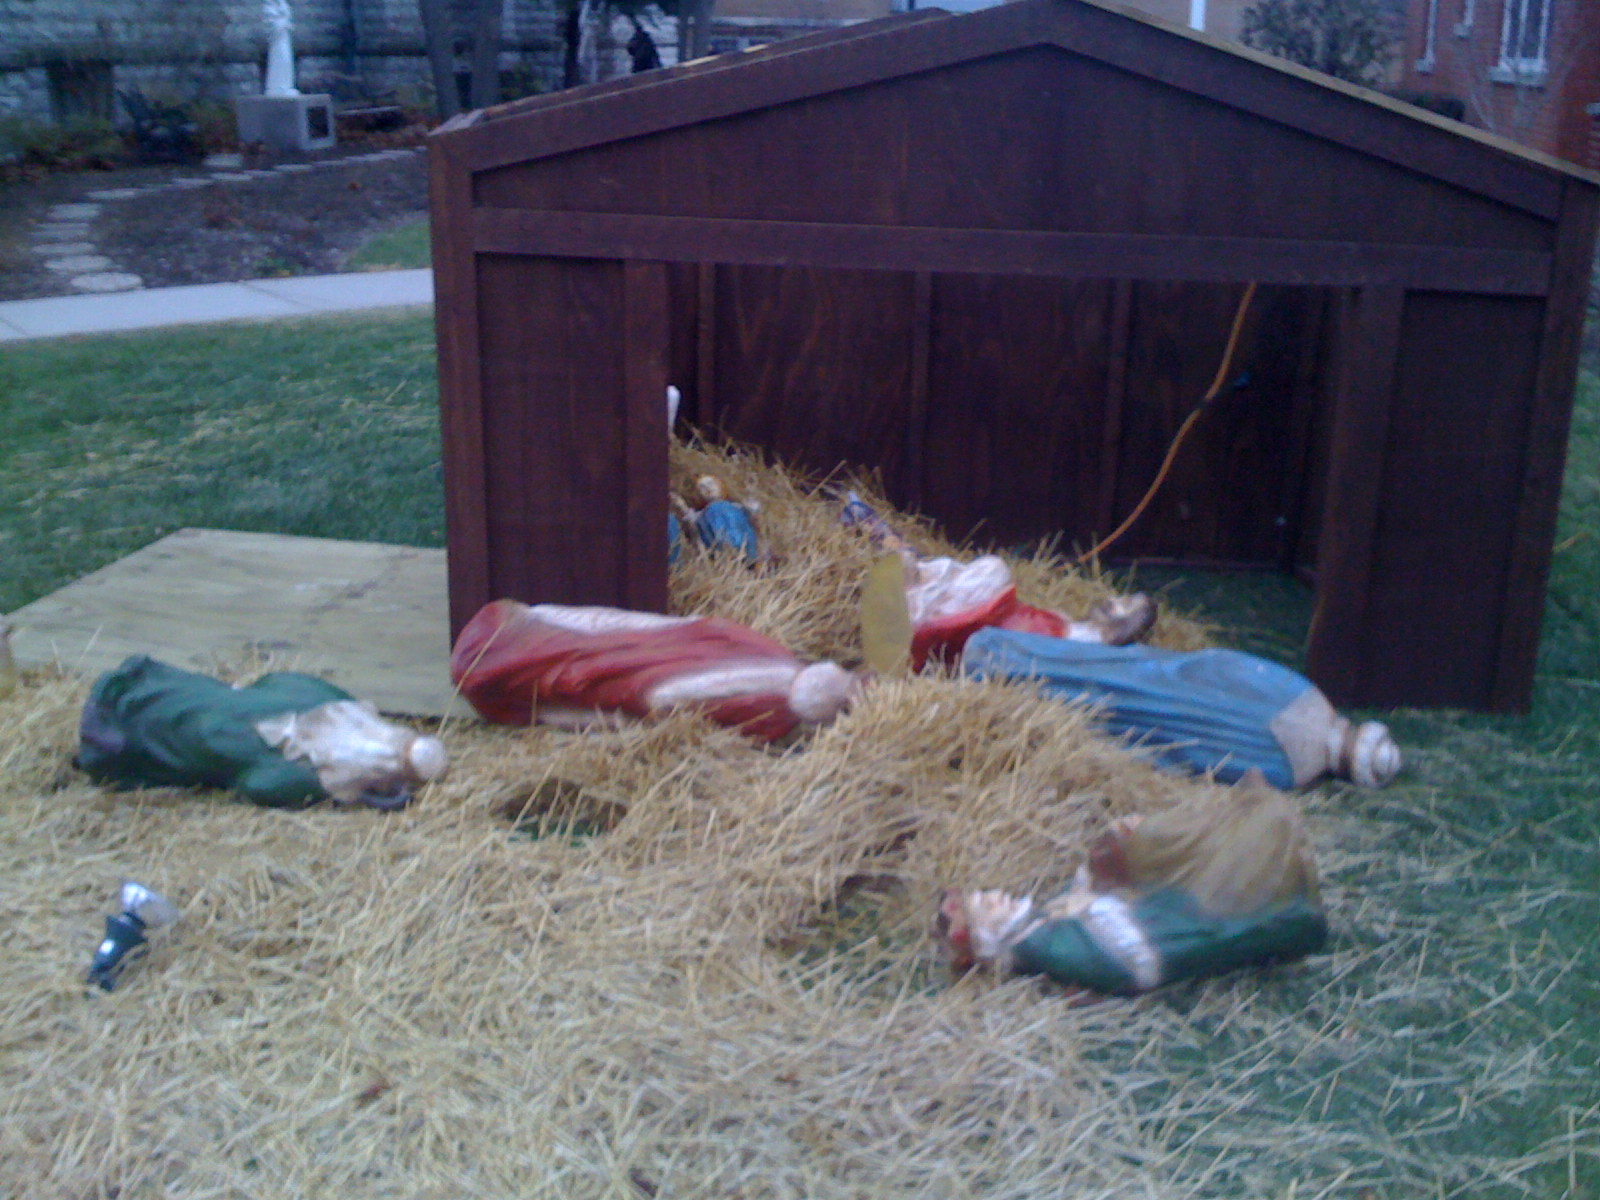 “We three kings of orient are… planking”